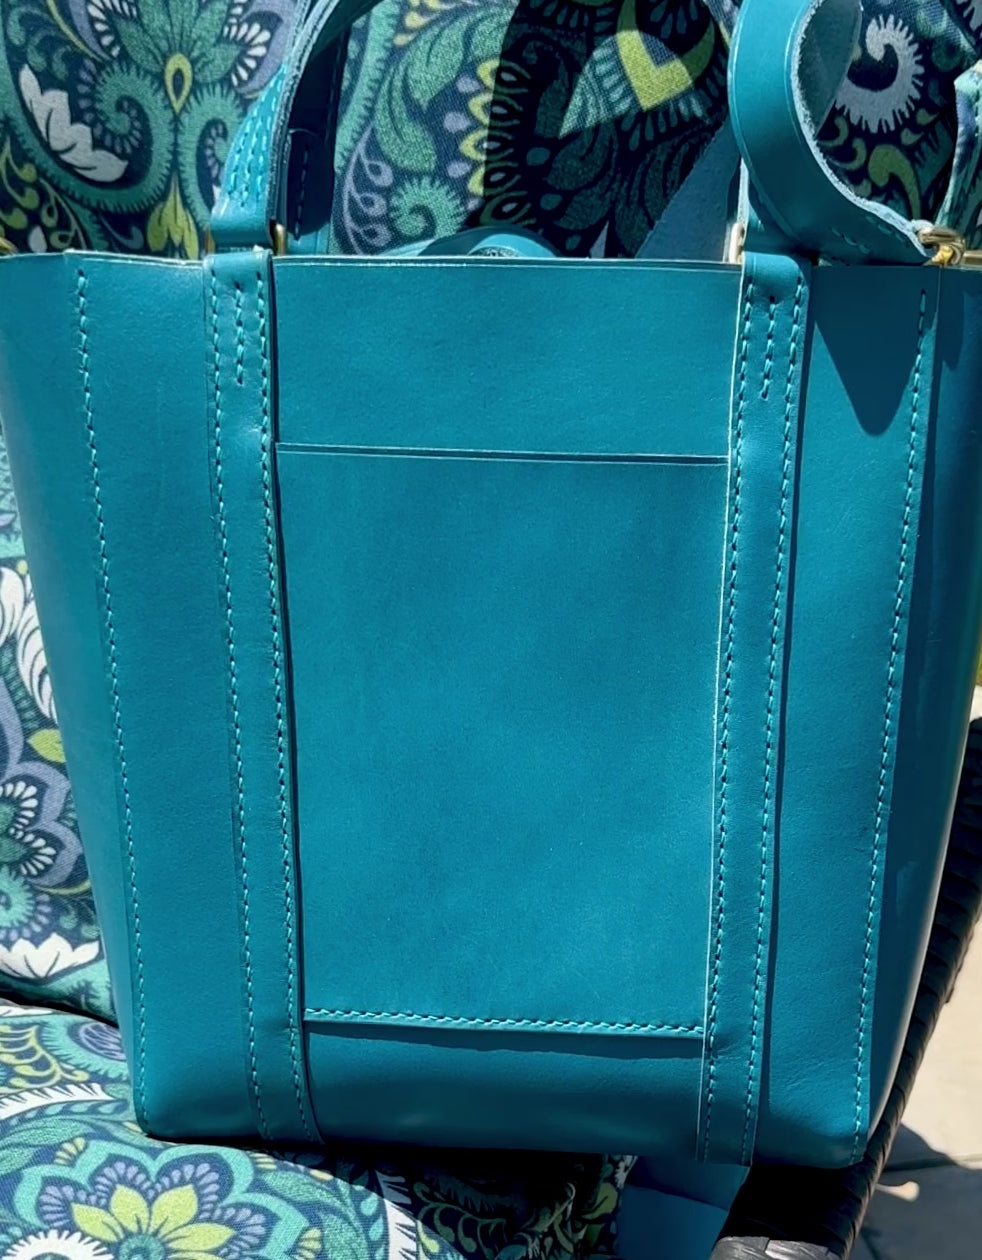 Leather Goods  Tiffany & Co. Tiffany & Co. Large Shopping Tote In